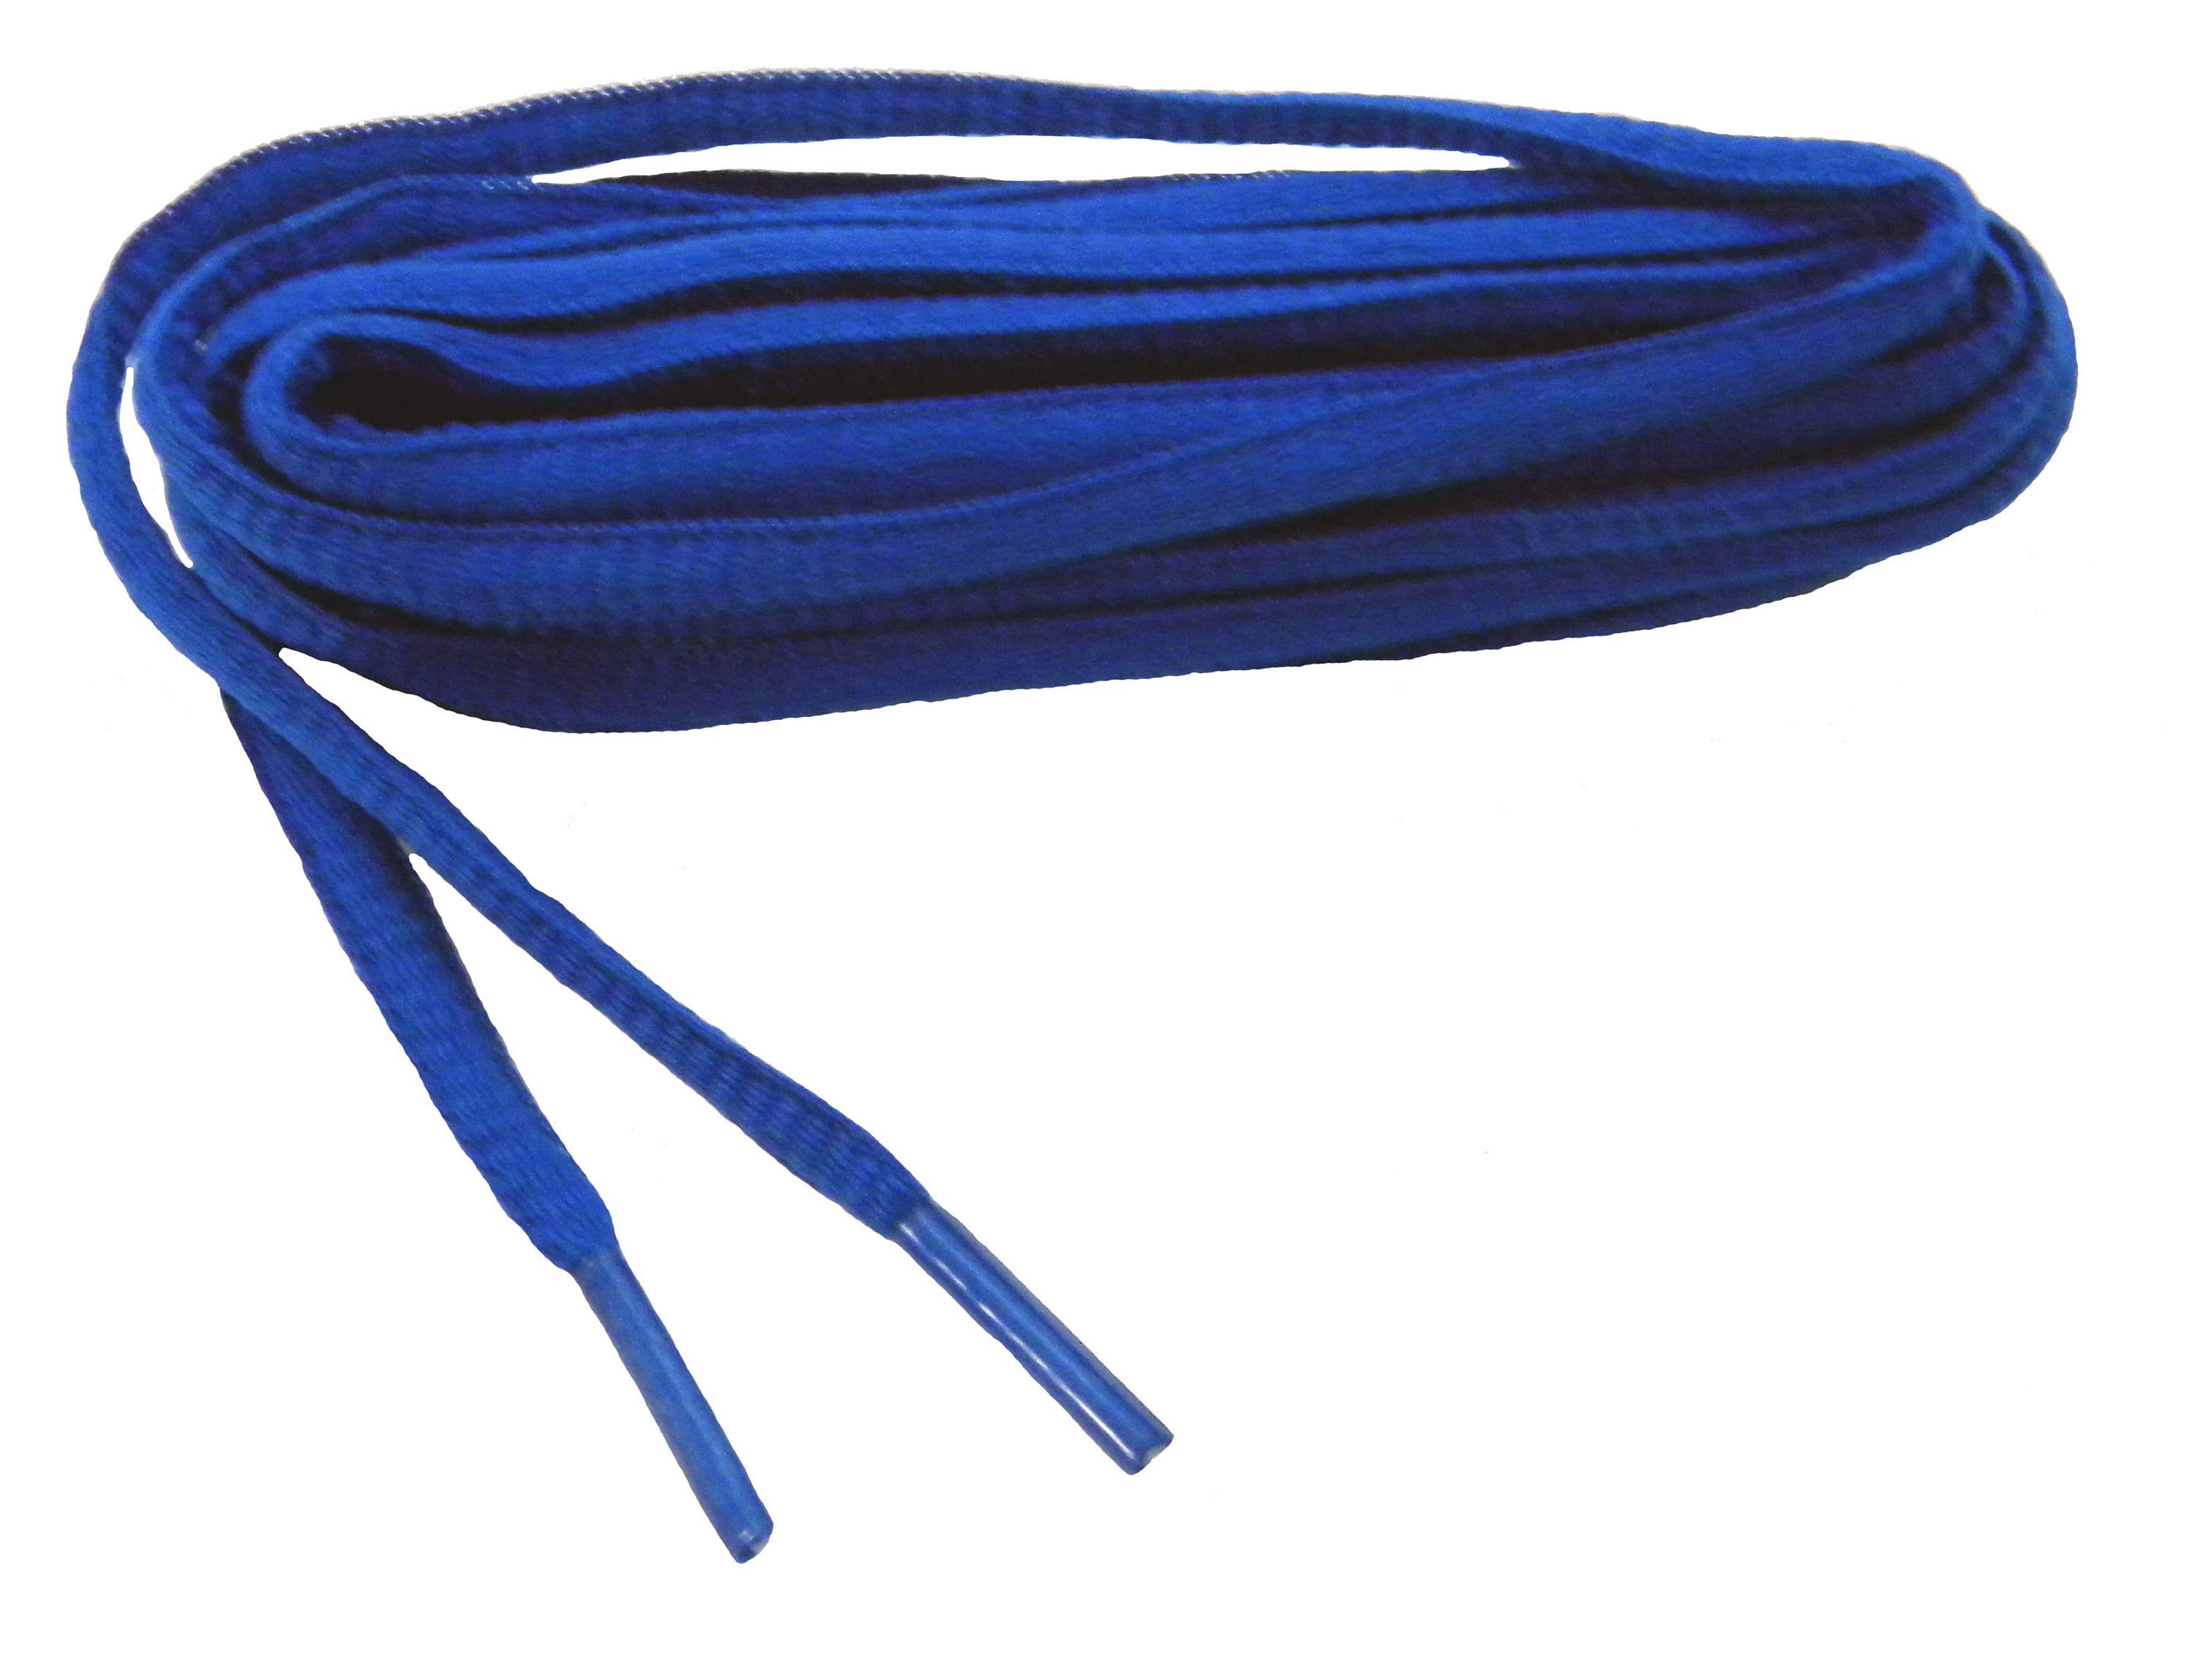 2 Pairs Round Athletic Sport Sneaker "Royal Blue" 27,36,45,54" String Shoelace 